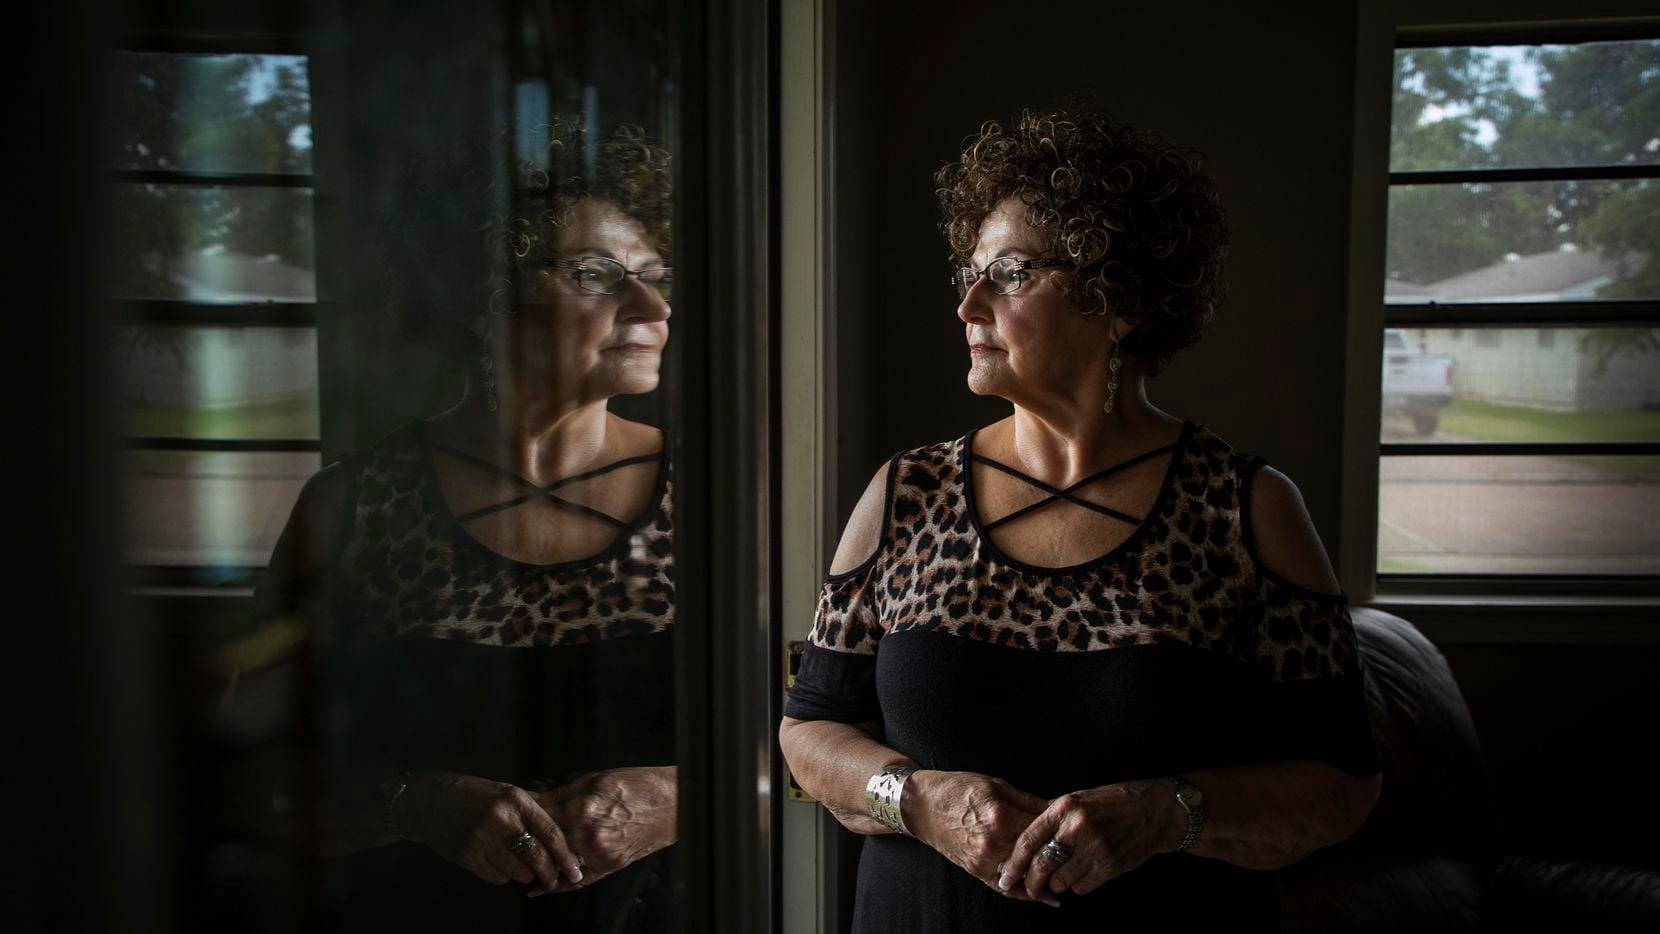 Peggy Bailey photographed at her home on Monday, Aug. 20, 2018, in Port Arthur, Texas.